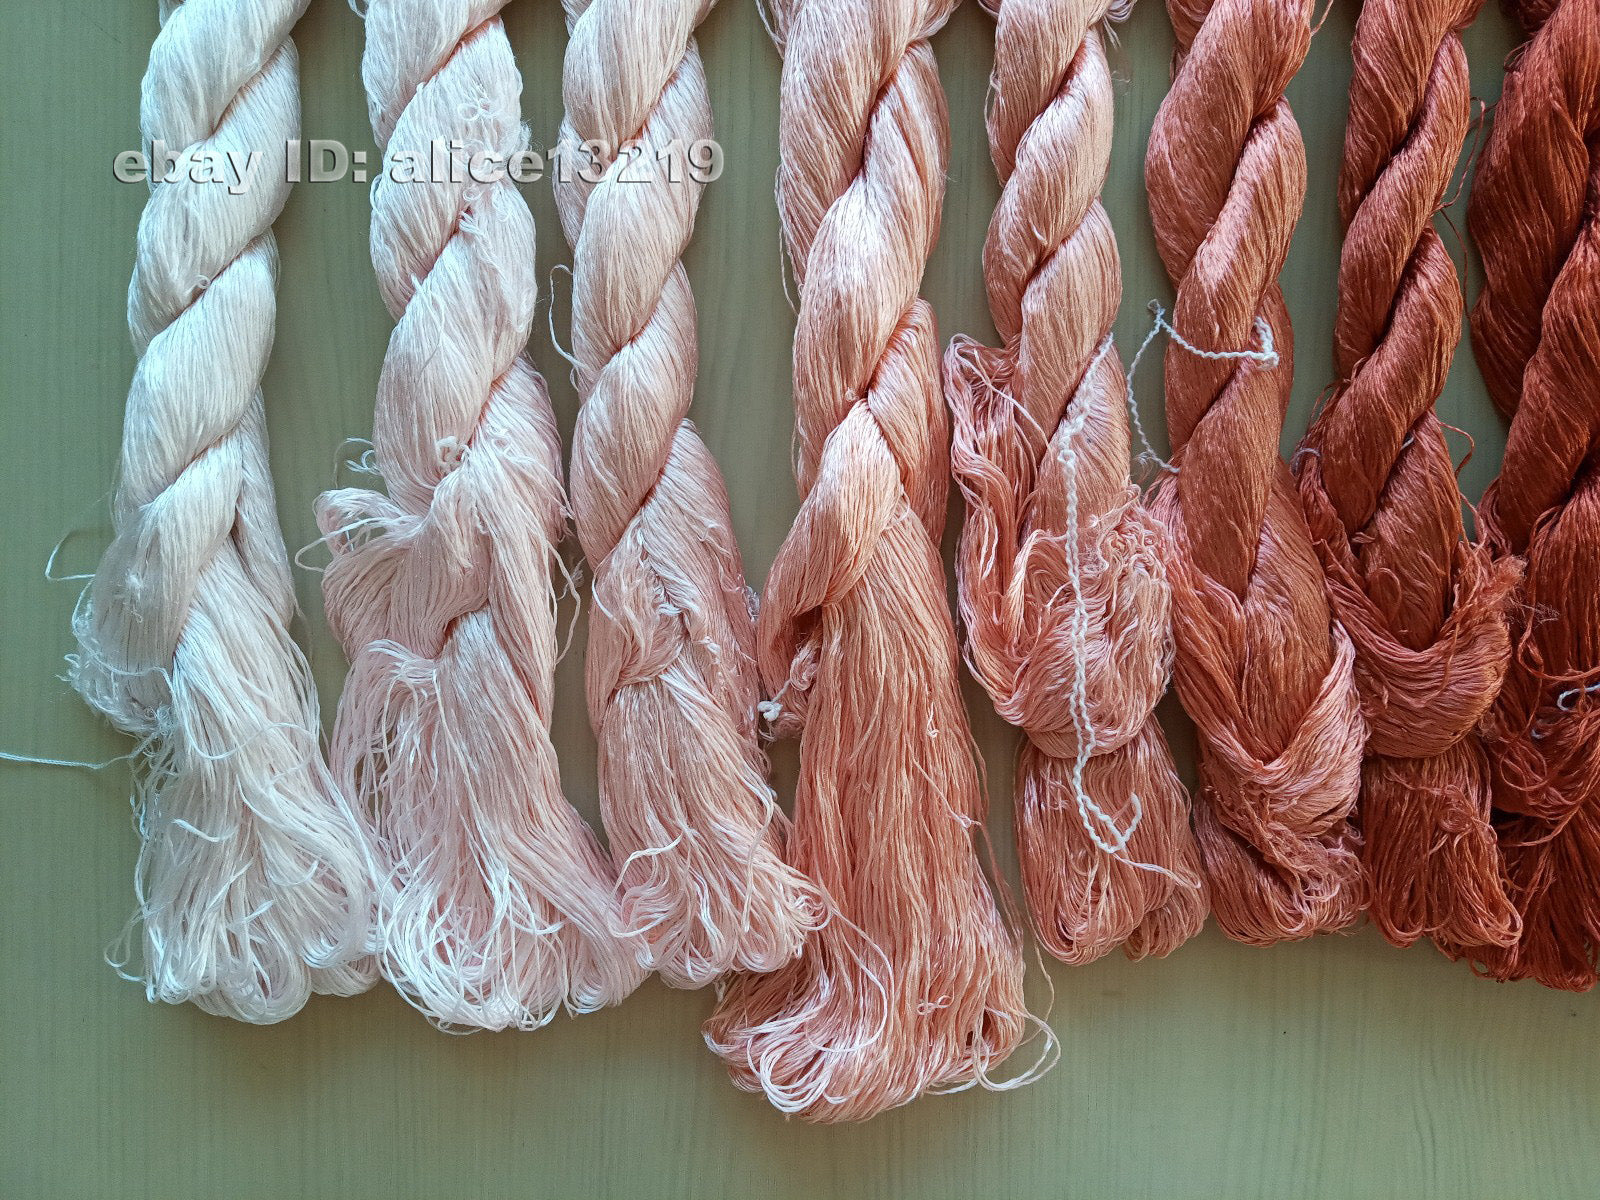 10bundles 100%real mulberry silk,hand-dyed embroidery silk floss/thread N93